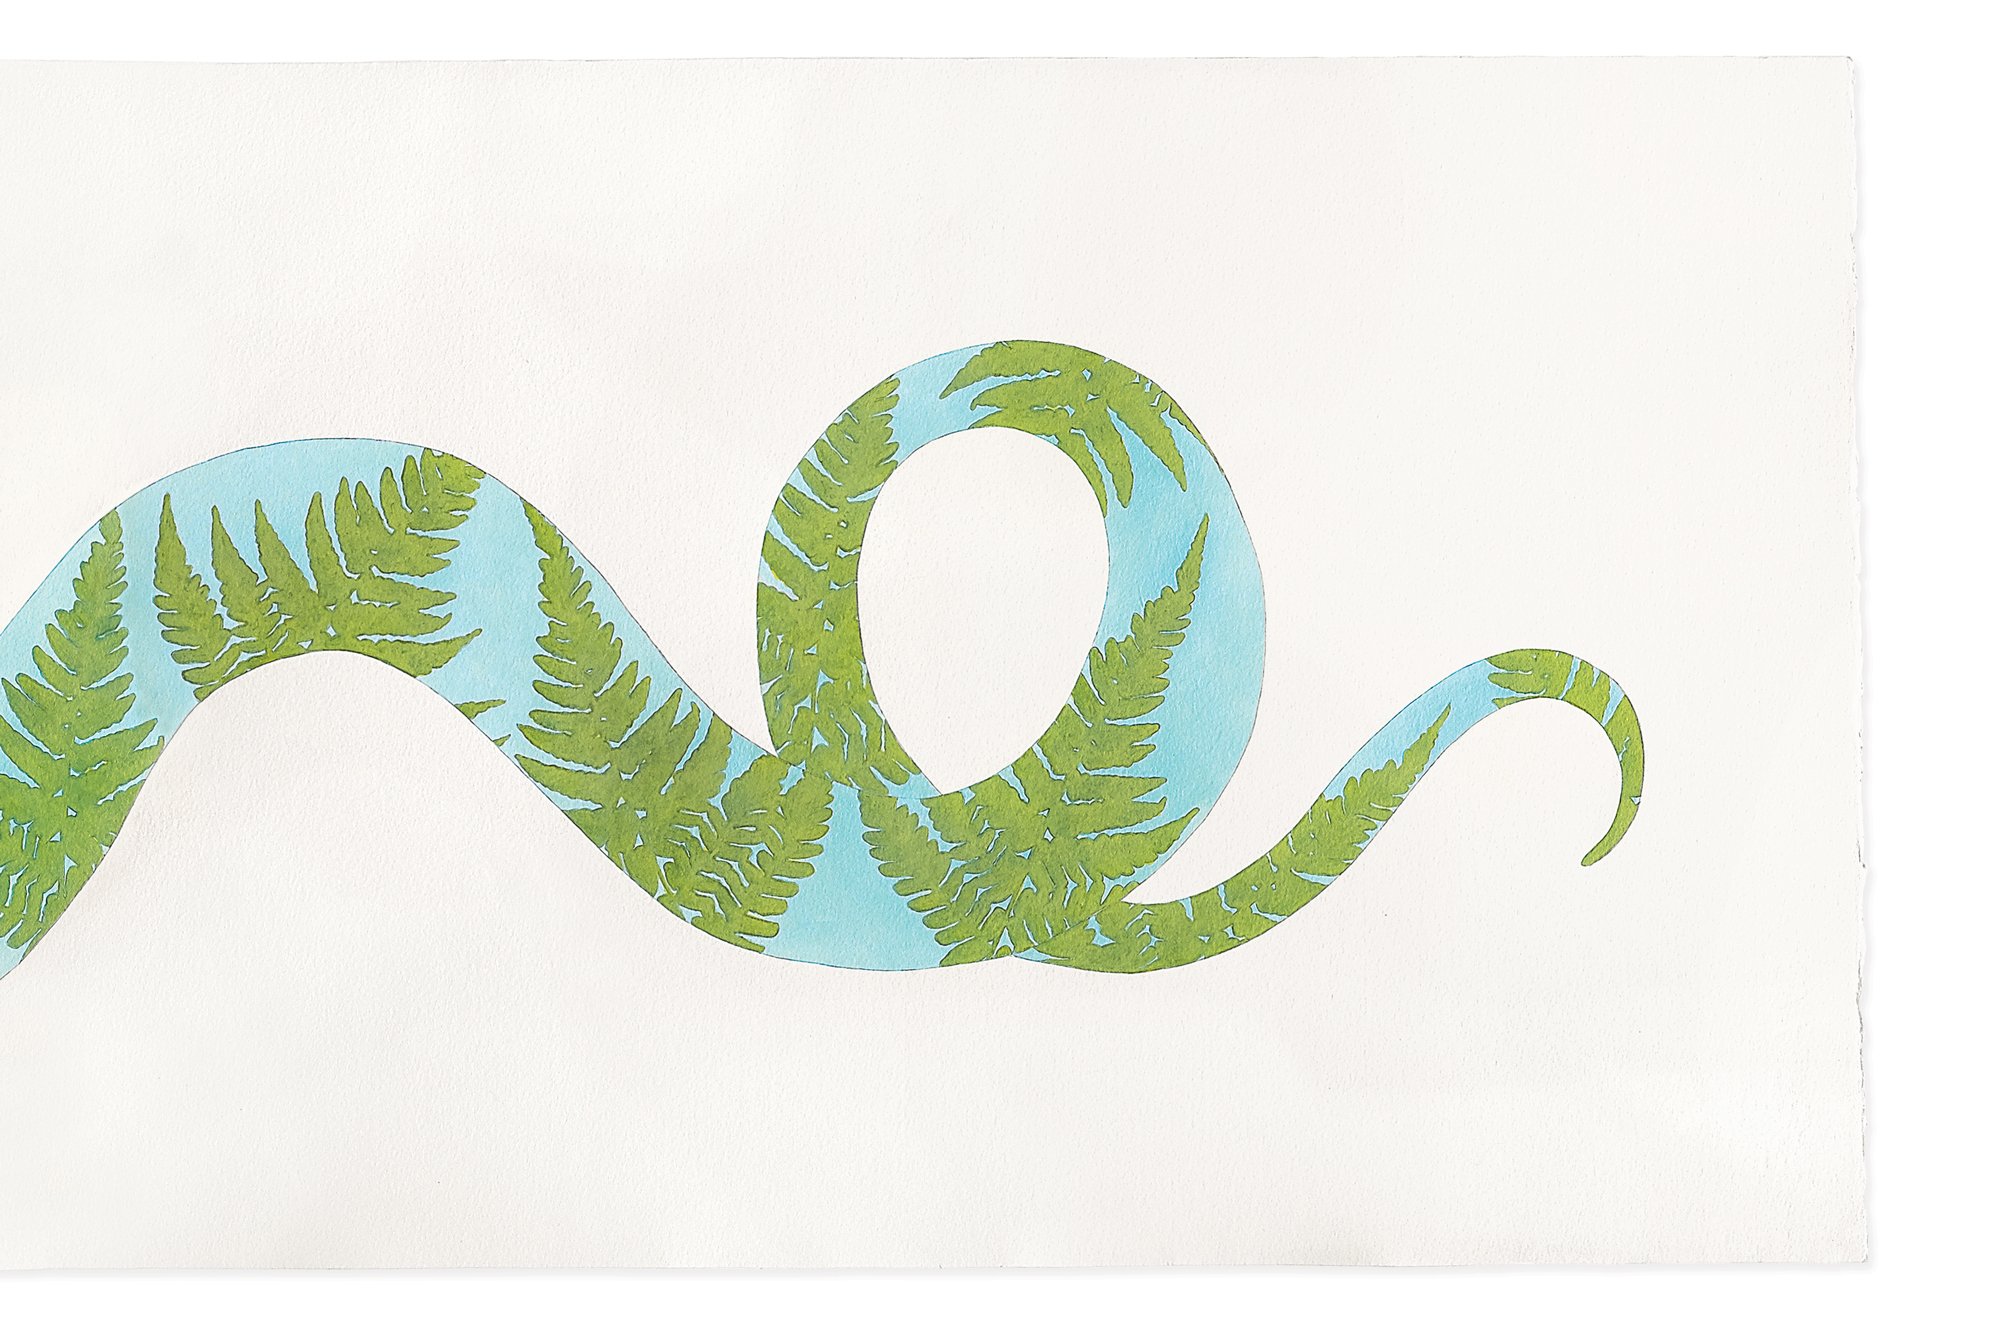   Shade Snake,  2022 Acrylic on paper, 15”x55”    View Next Set →   